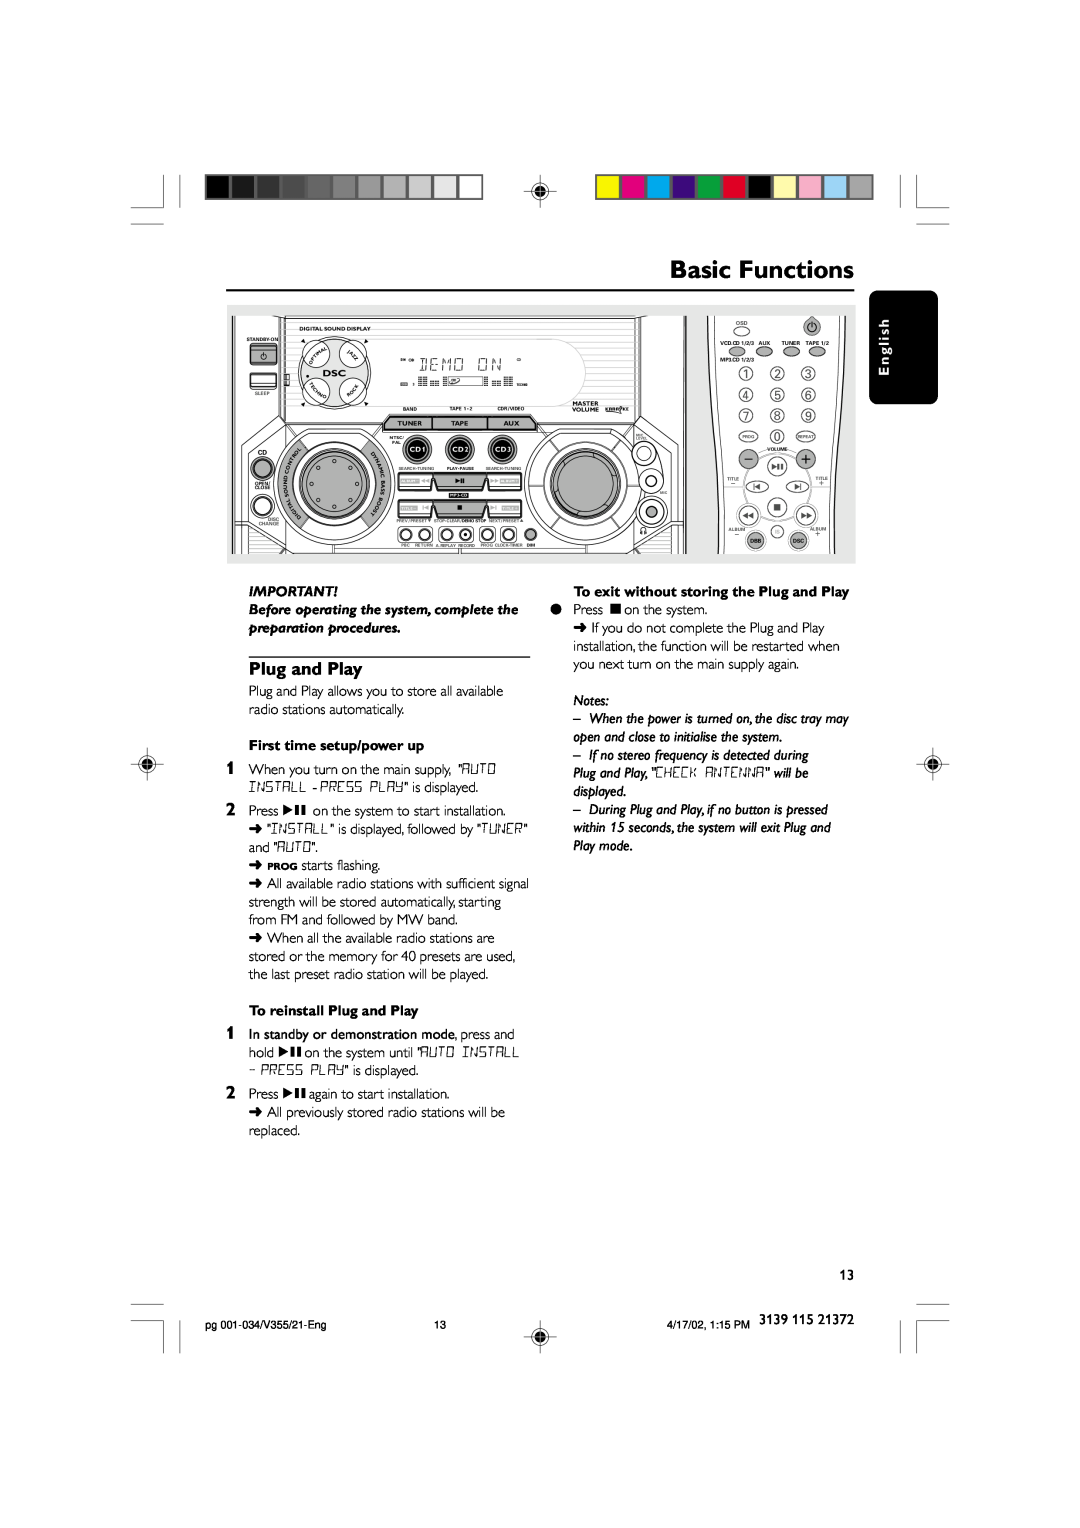 Philips FW-V355 manual Basic Functions, To exit without storing the Plug and Play, First time setup/power up, English 